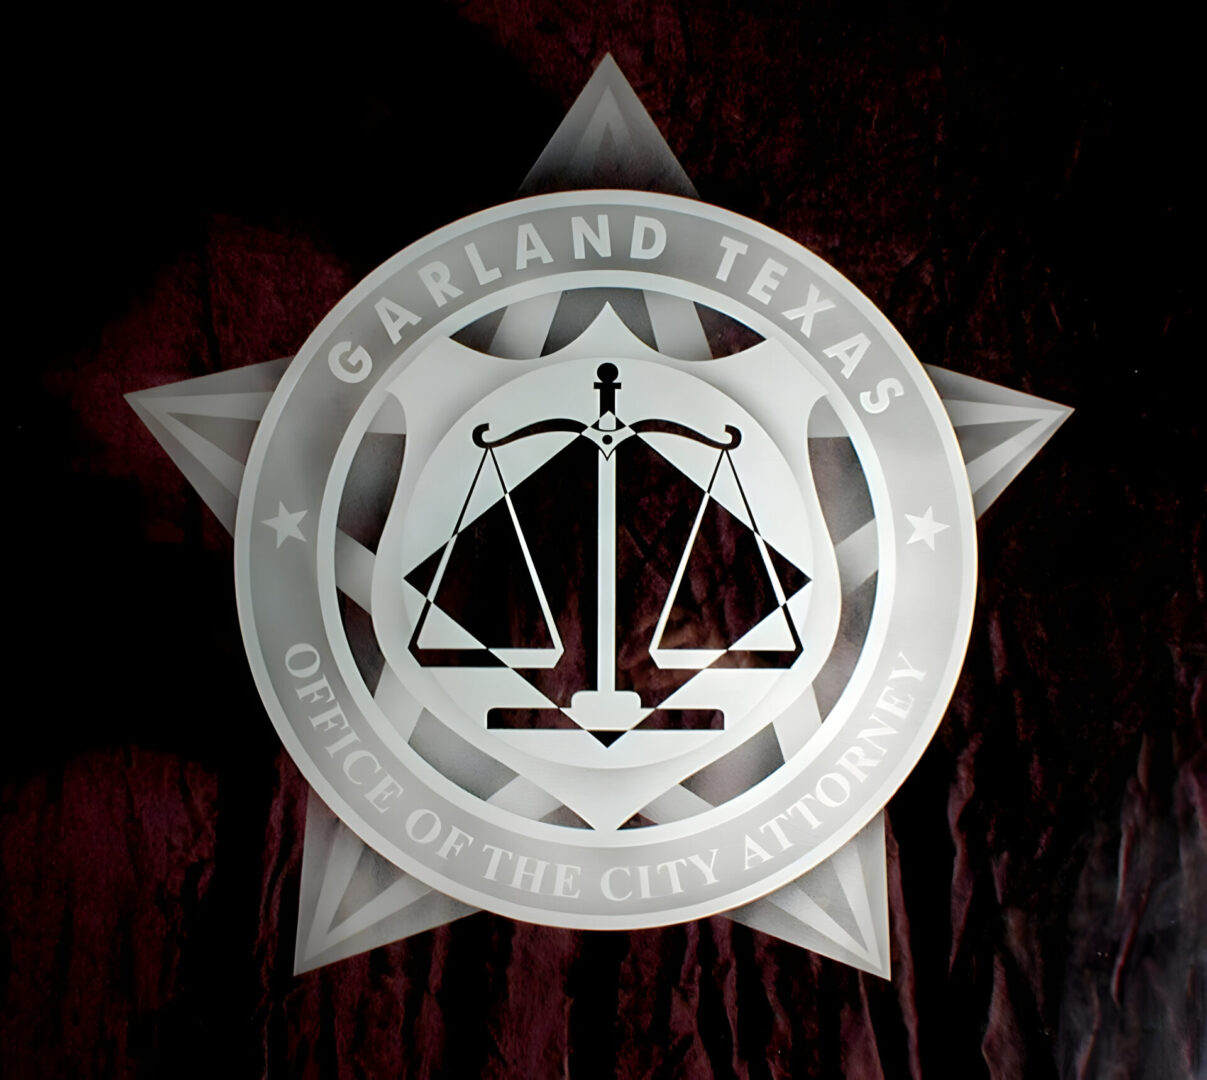 Emblem of the garland texas office of the city attorney with a scale symbol at the center.